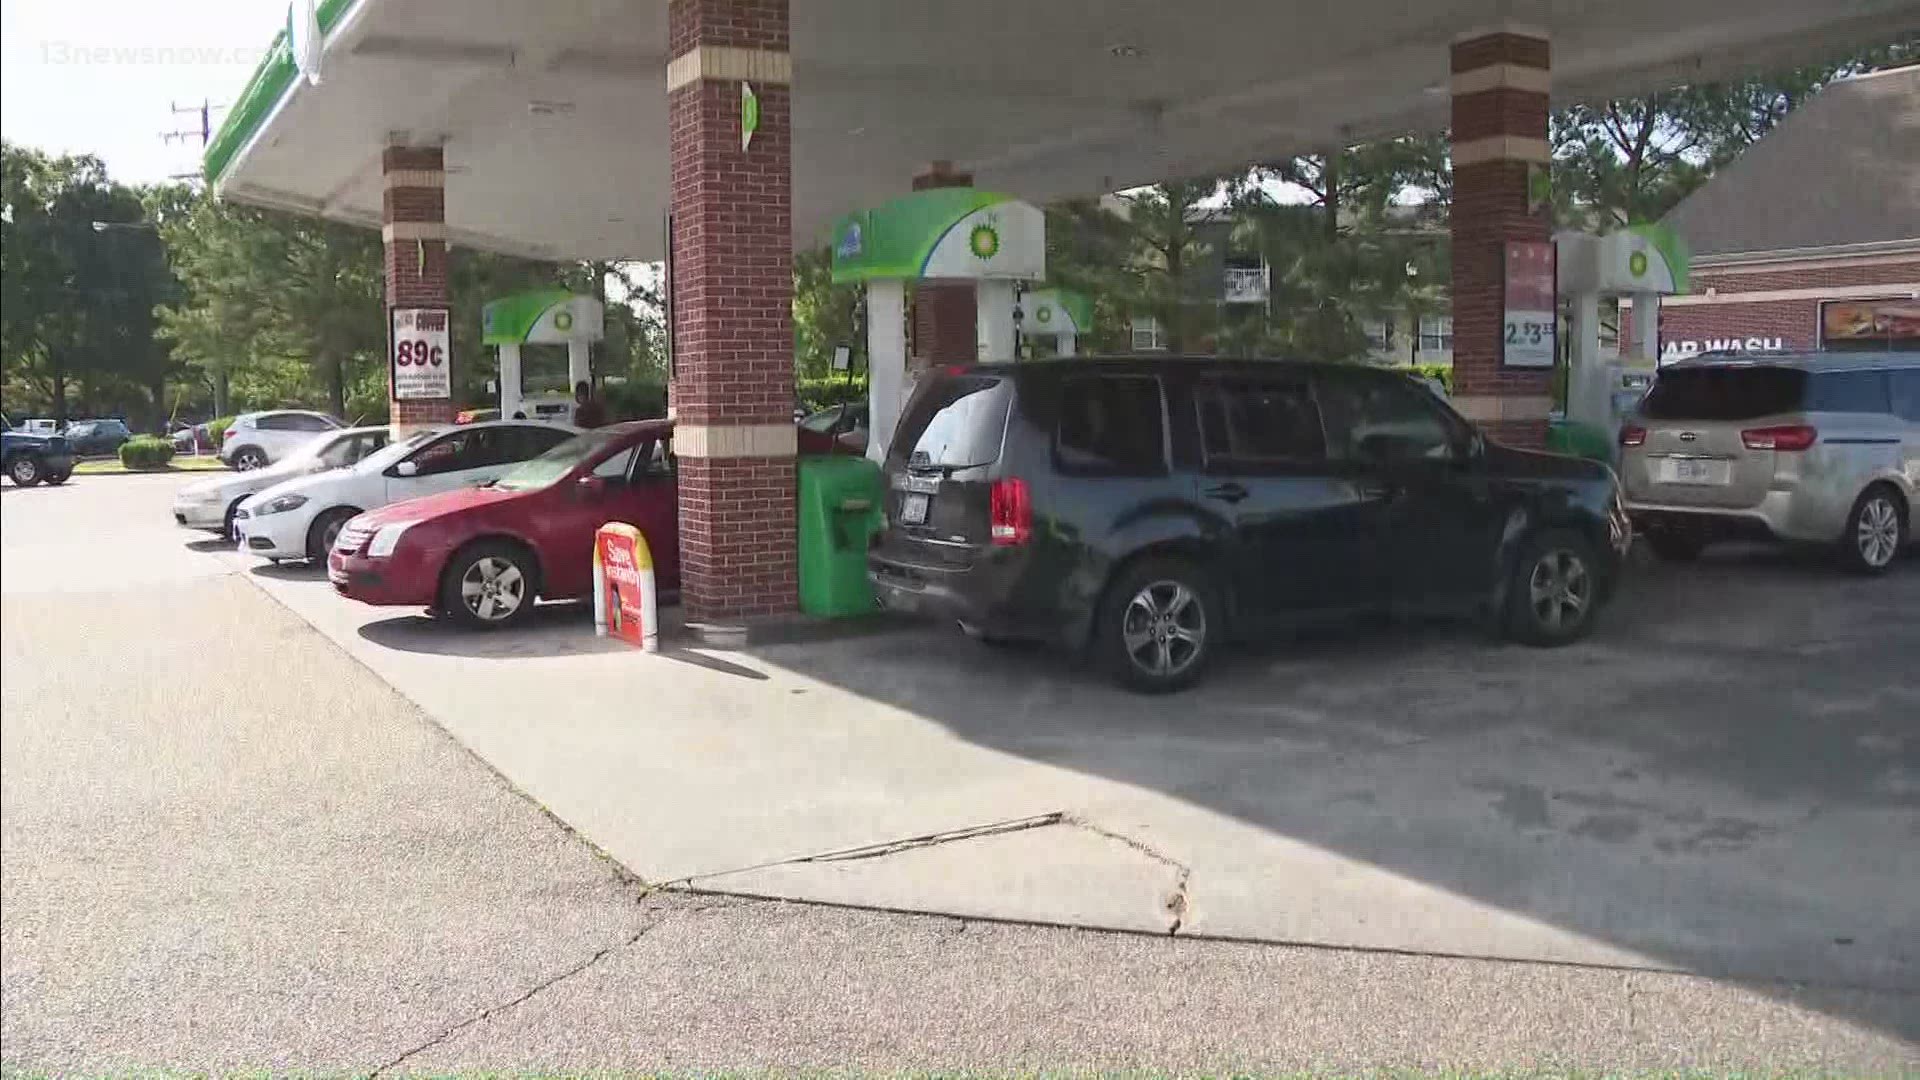 13News Now Allison Bazzle was at a gas station in Virginia Beach where the line of cars grew as people try to fill up their tanks after the Colonial Pipeline attack.